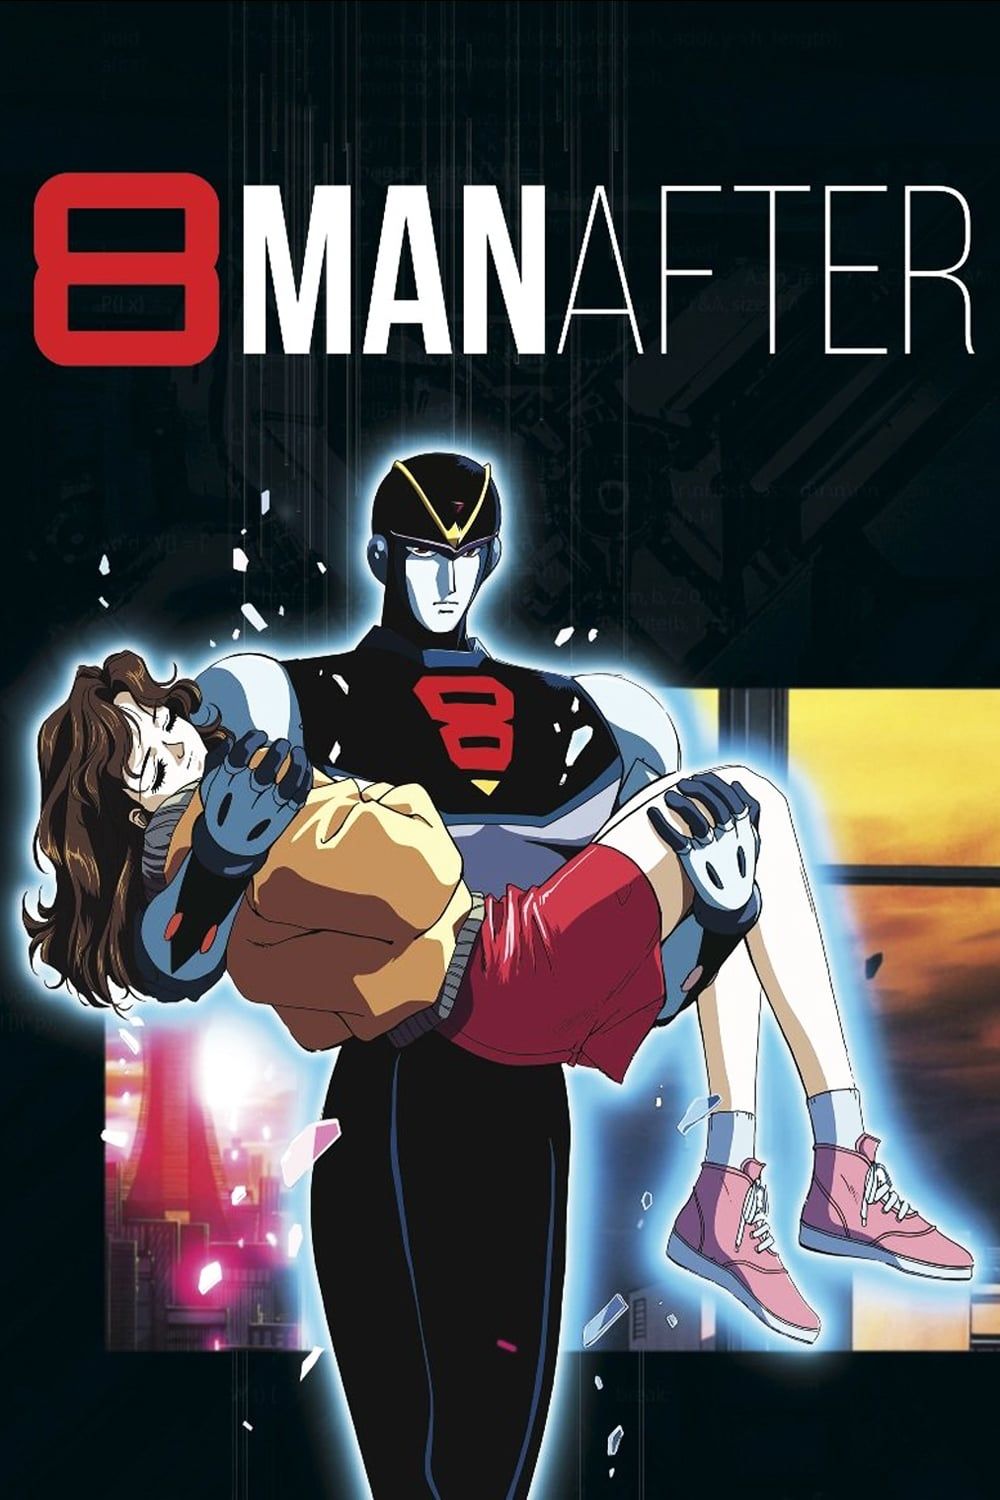 [Action] Eightman After (OVA) (Sub) Most Viewed